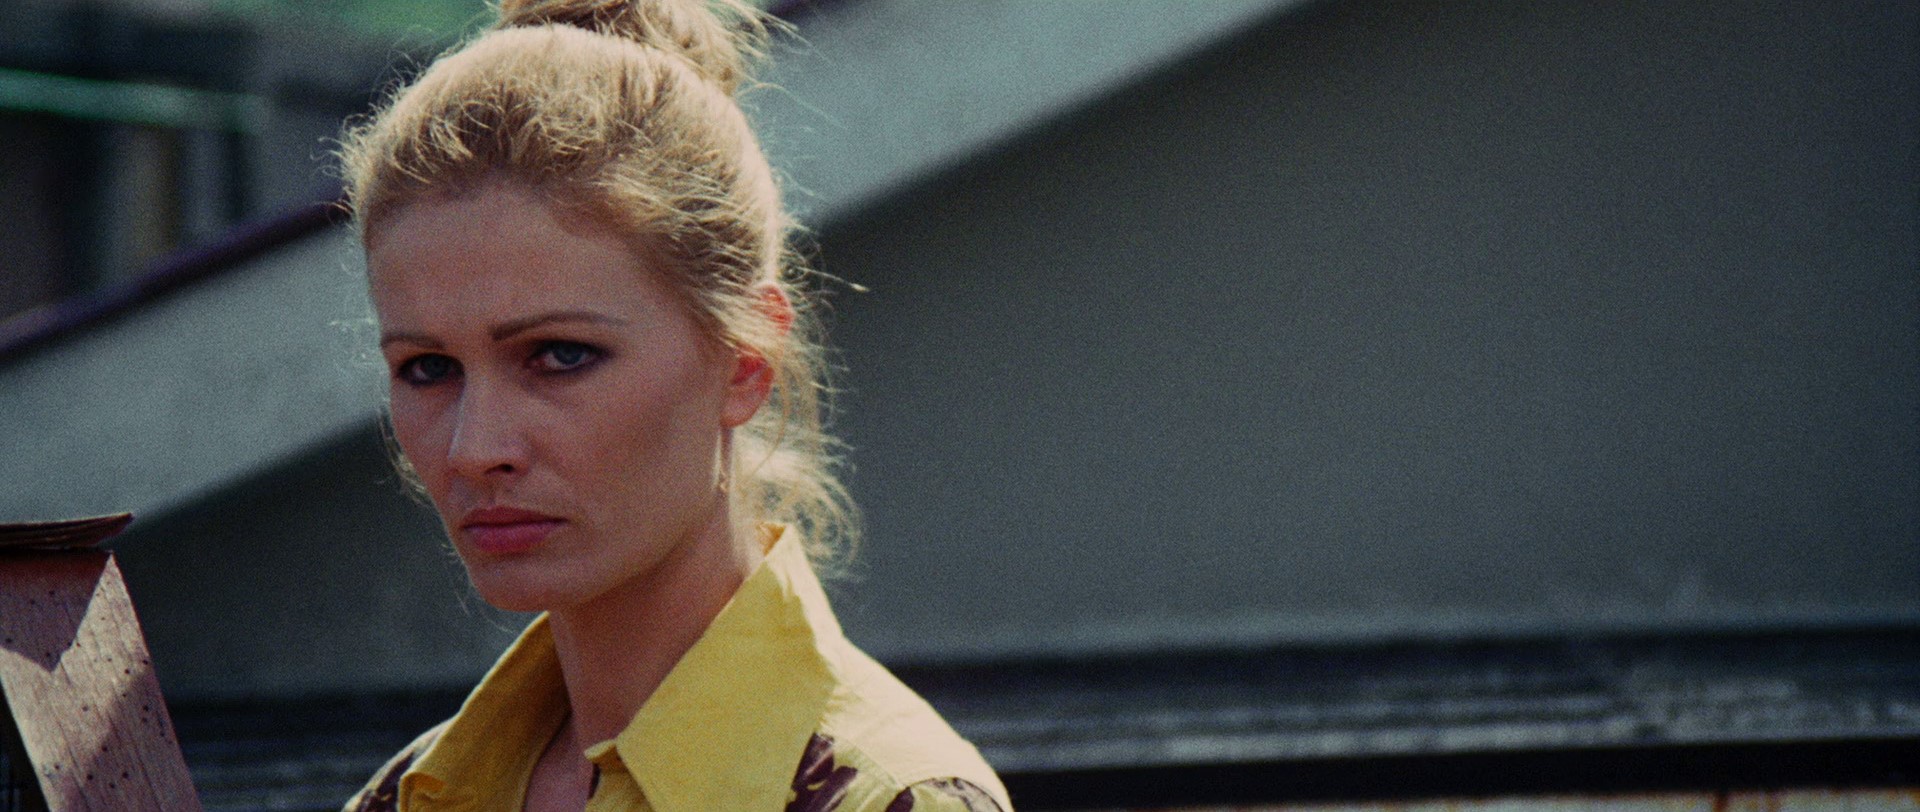 The Bloodstained Butterfly (1971) Screenshot 3 